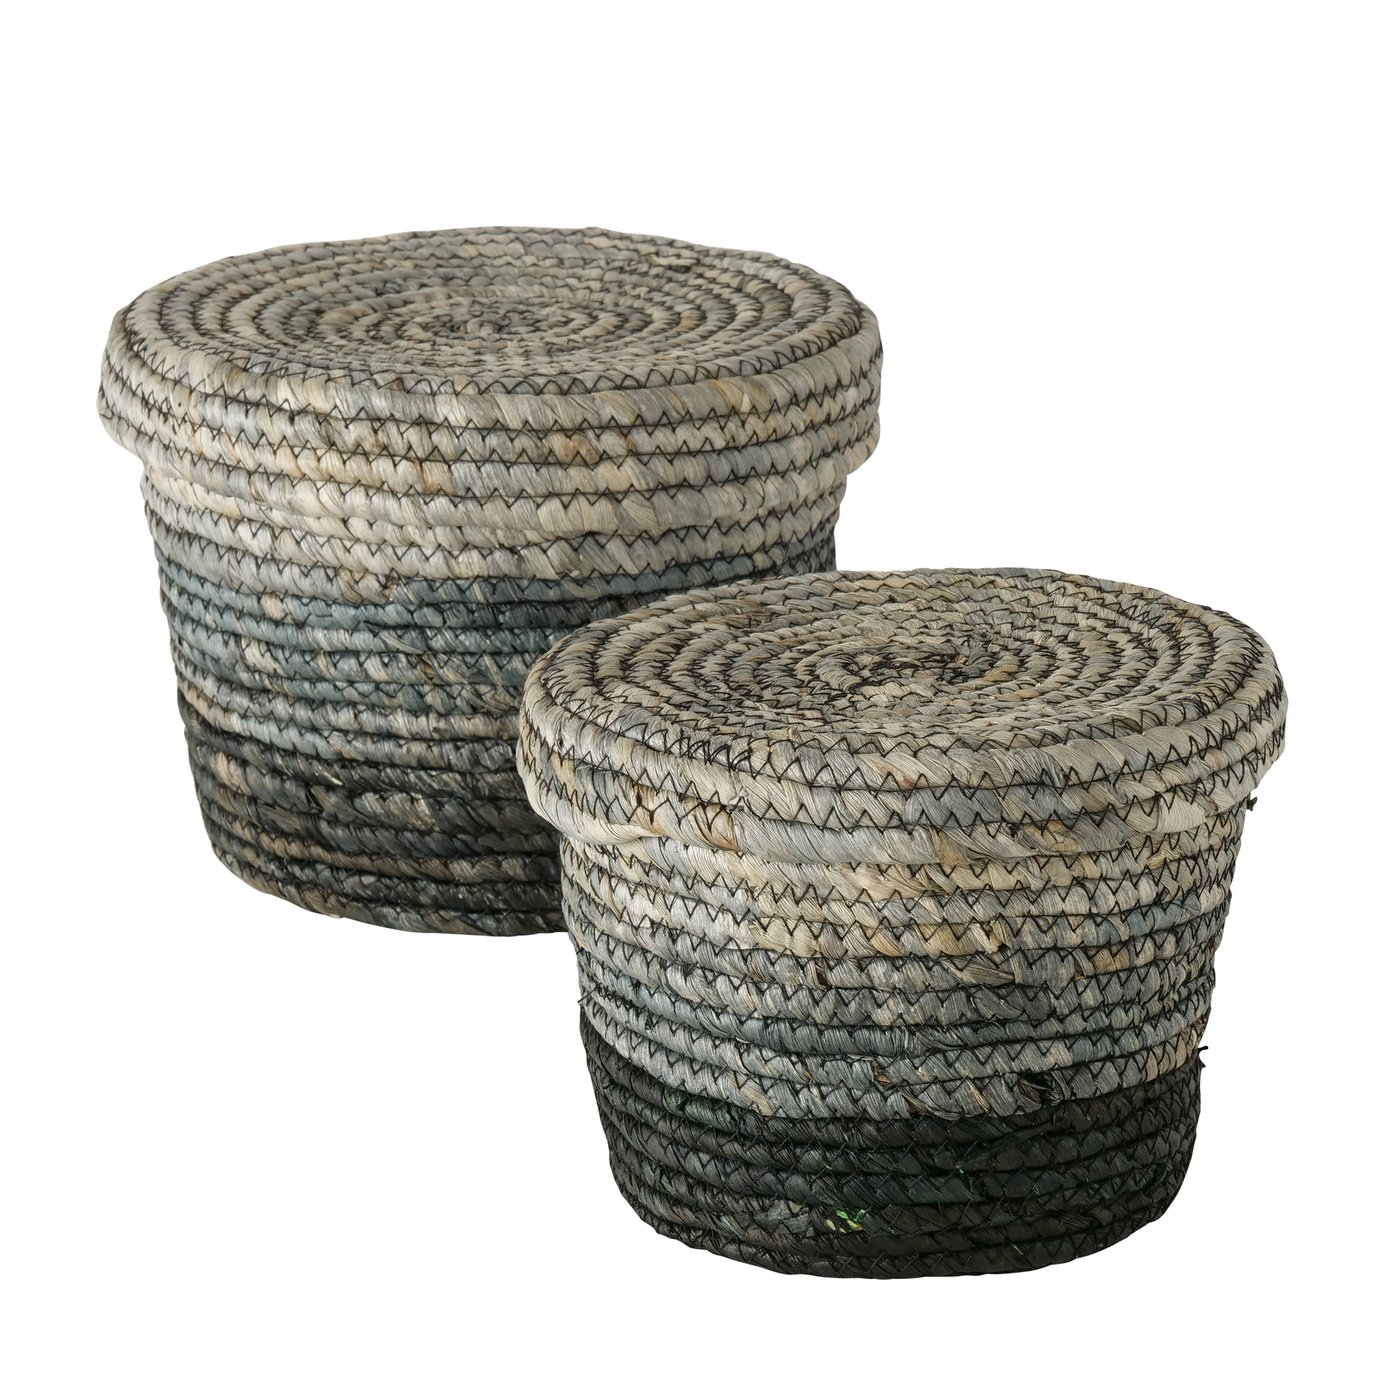 &Quirky Gian Black Grey Lidded Baskets : Set of 2